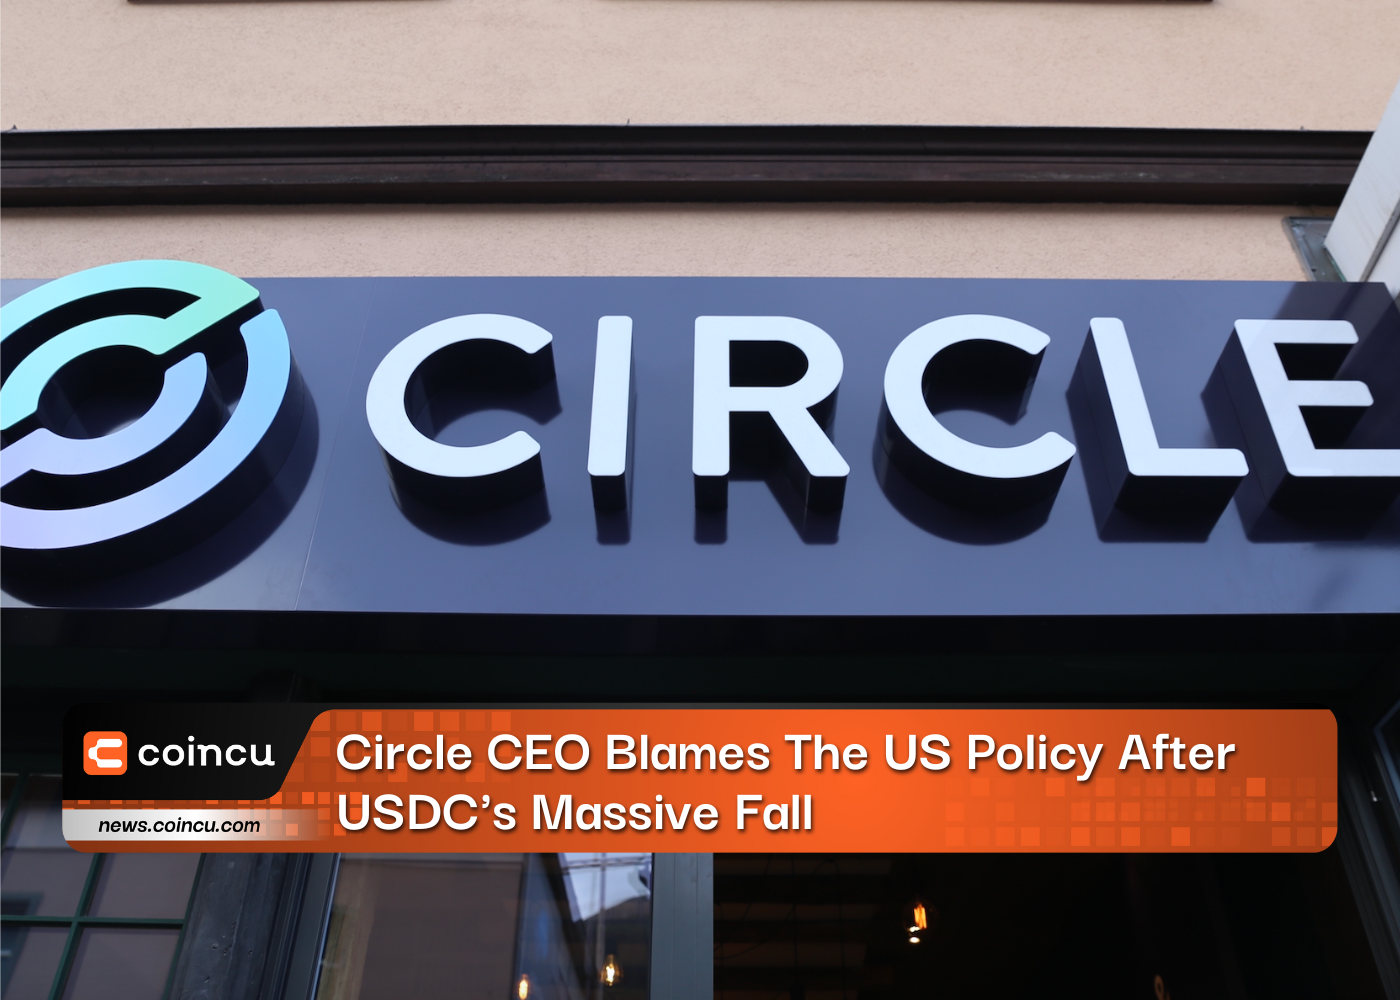 Circle CEO Blames The US Policy After USDC's Massive Fall